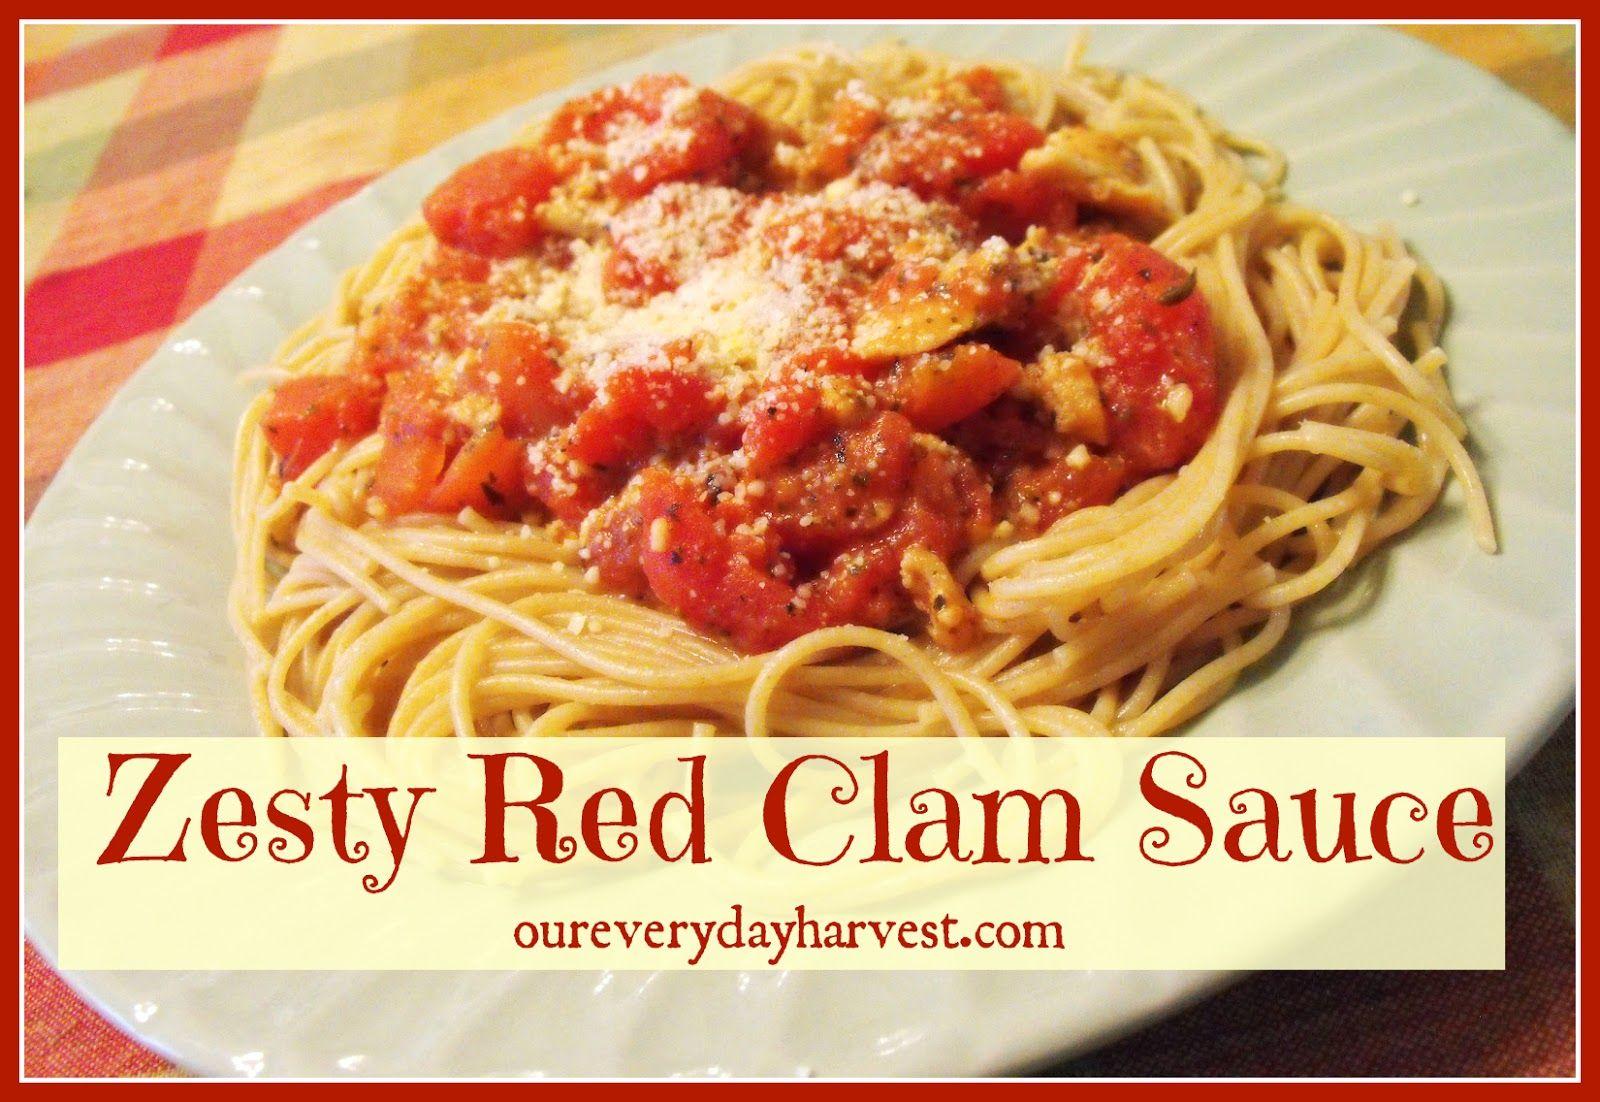 Yellow and Red Clam Logo - Zesty Red Clam Sauce. Our Everyday Harvest